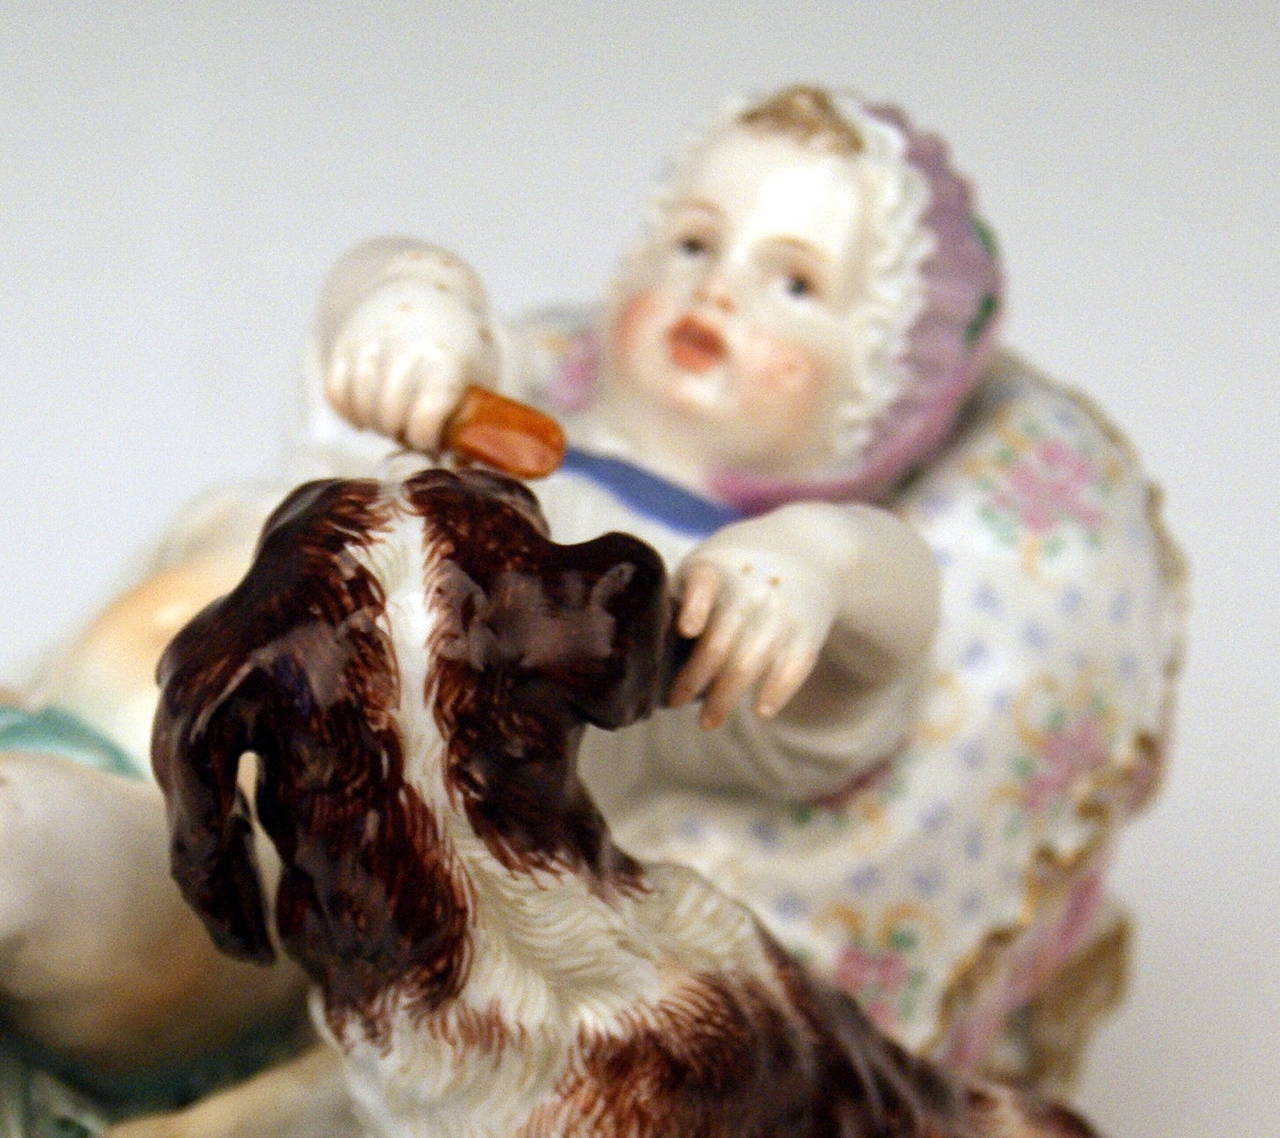 Mid-19th Century Meissen Lovely Figurine Group by Acier of the Placidness of Childhood, 1840 For Sale